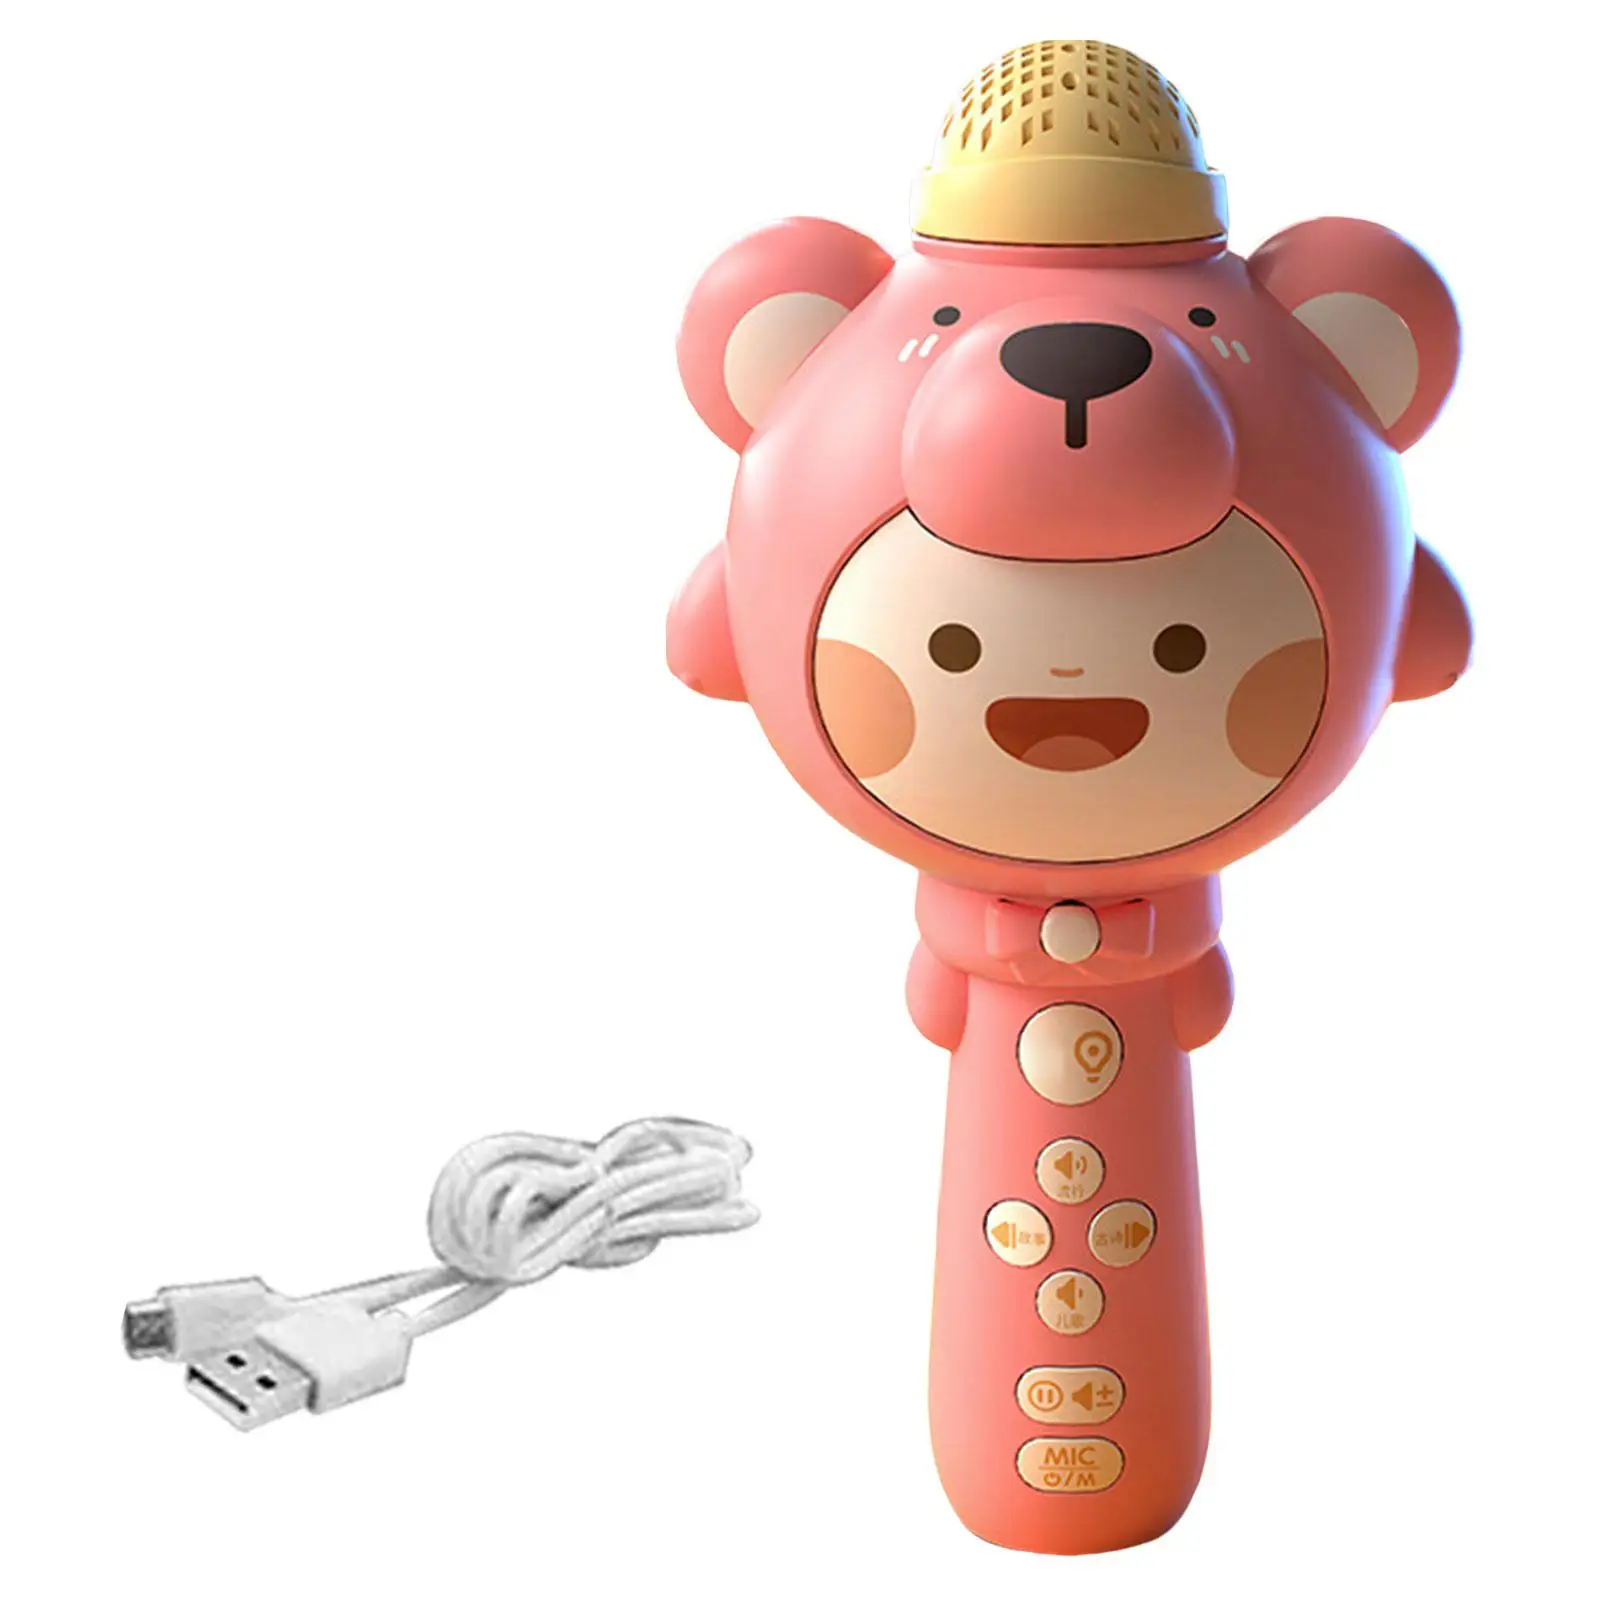 Kidsrophone Machine Toy Bluetooth Microphone for Adults Children